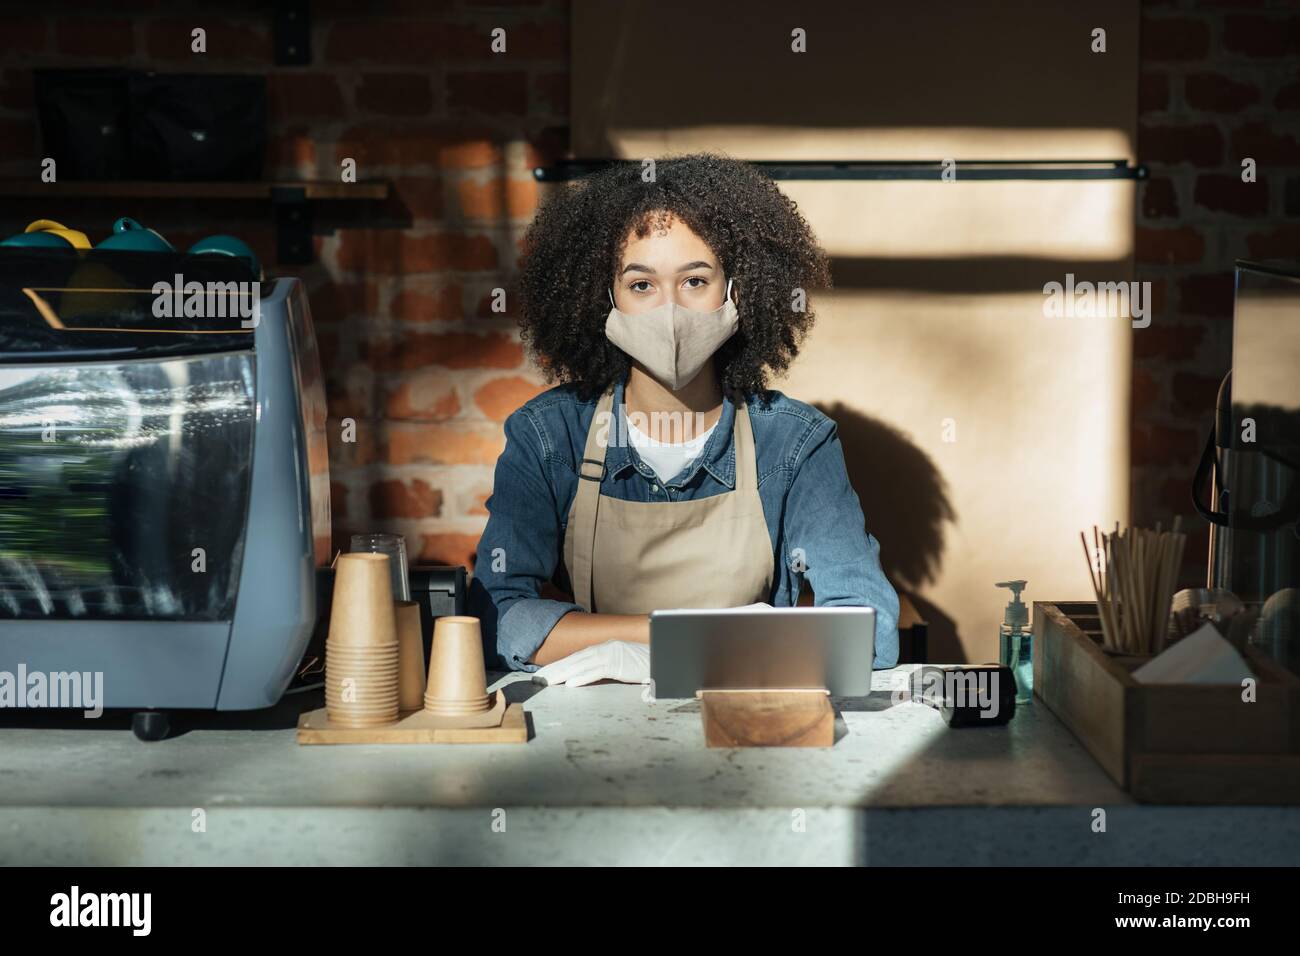 Modern technology for work during social distance and coronavirus quarantine in cafe Stock Photo